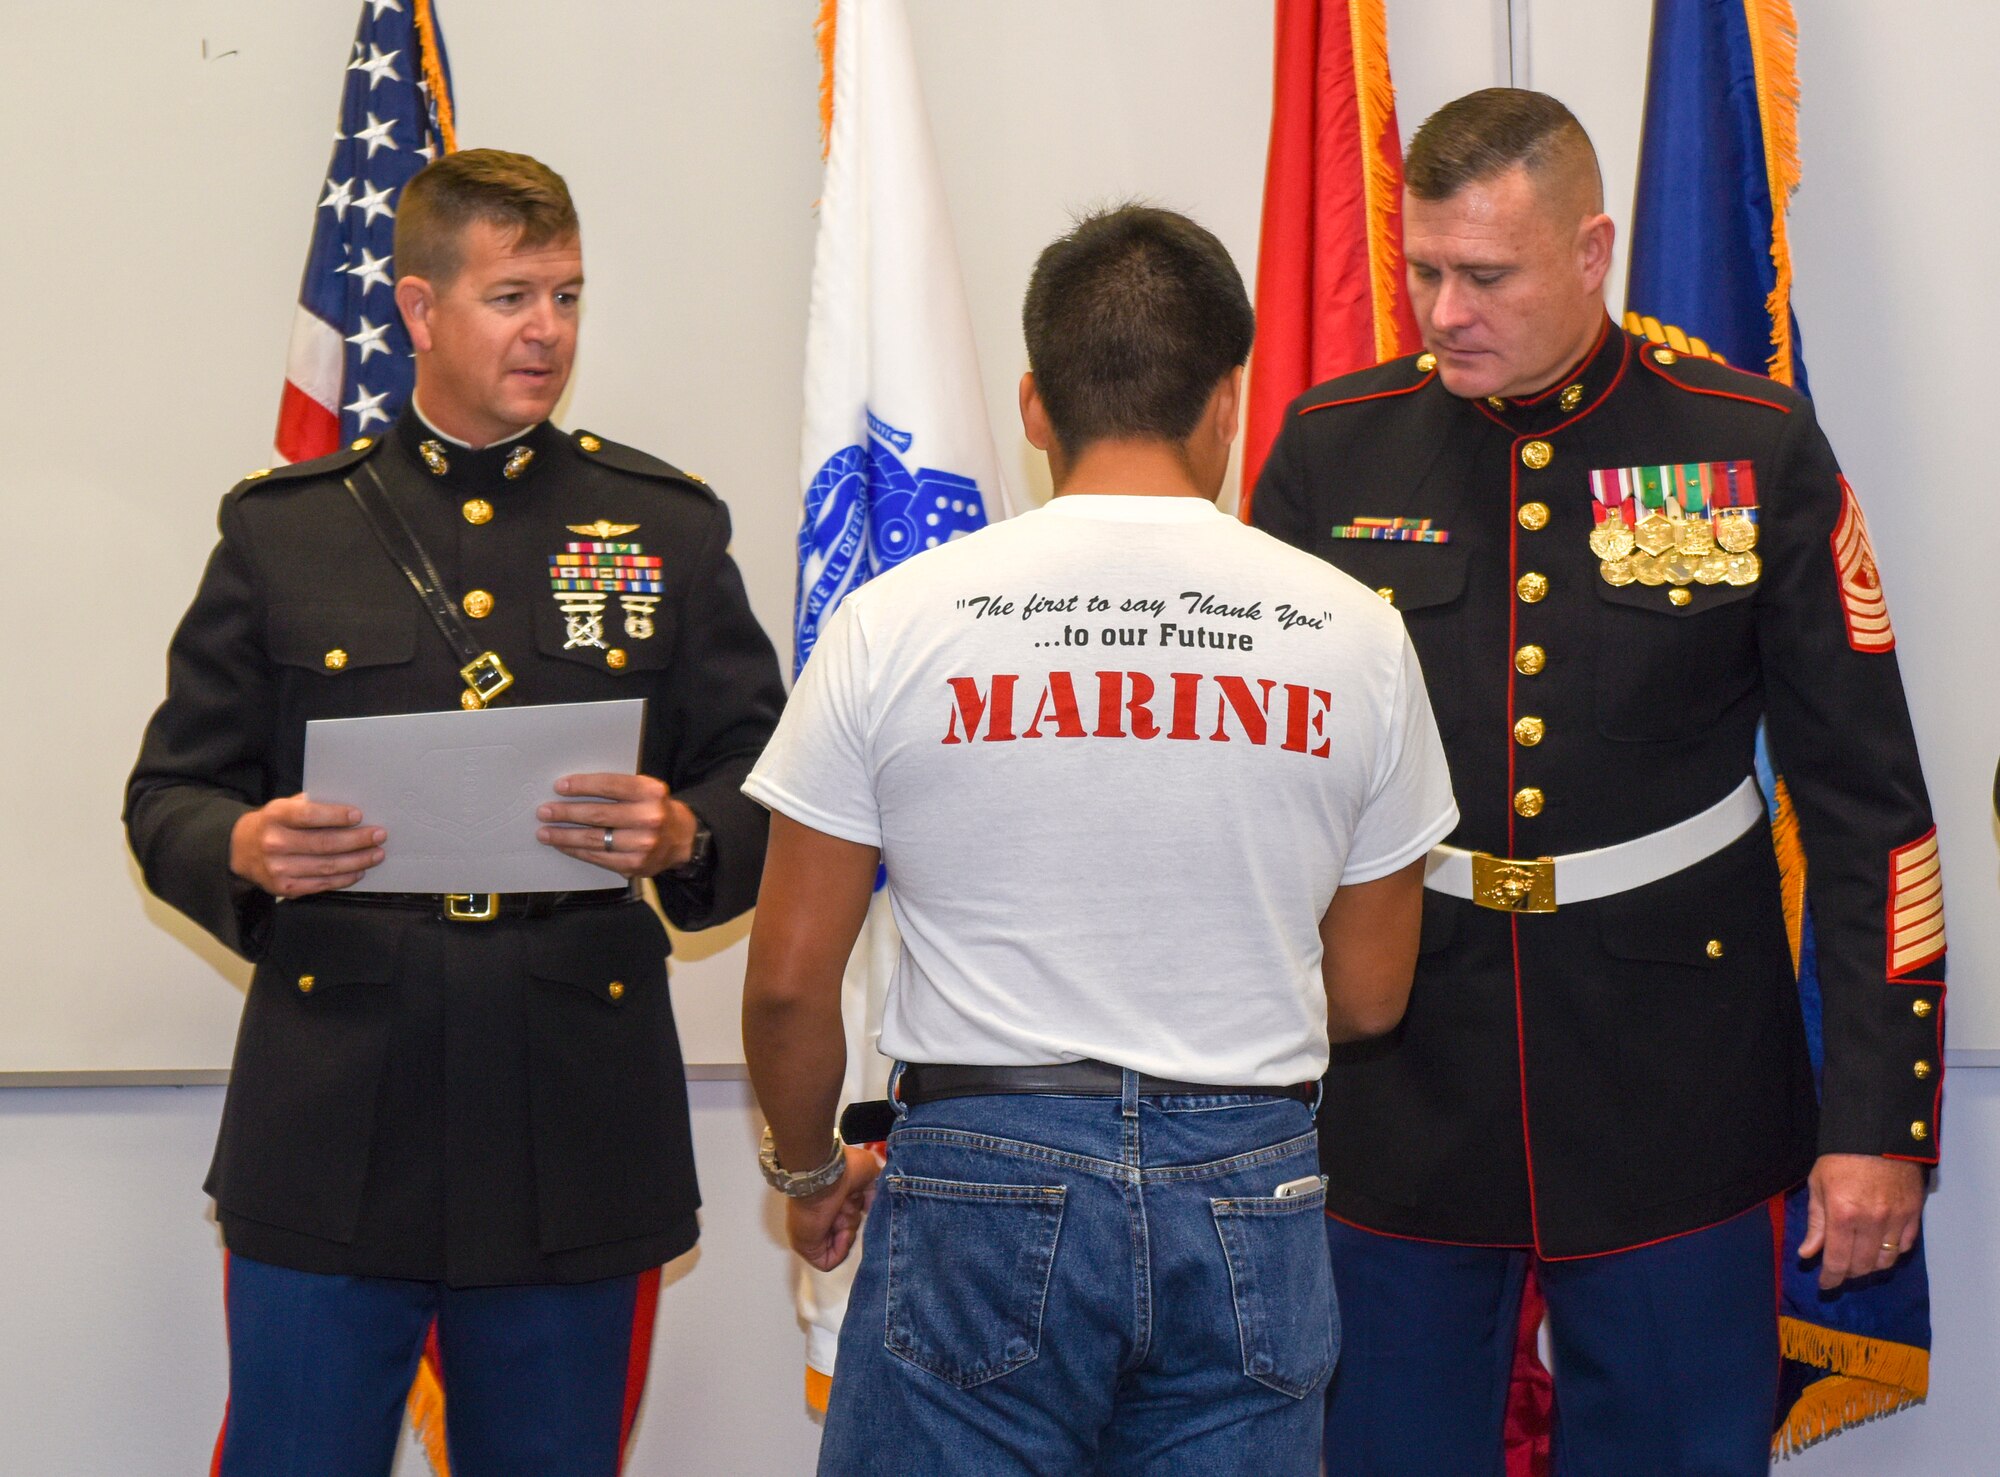 A Marine enlistee accepts his challenge coin and certificate from U.S. Marine Maj. Andrew Armstrong, Marine Corp Detachment commander, and Gunnery Sgt. Christopher Toten, Marine Corps Detachment senior enlisted leader during the Our Community Salutes ceremony San Angelo, Texas, May 19, 2018. The Marine Corps had eight enlistees, the most of the services represented. (U.S. Air Force photo by Aryn Lockhart/Released)